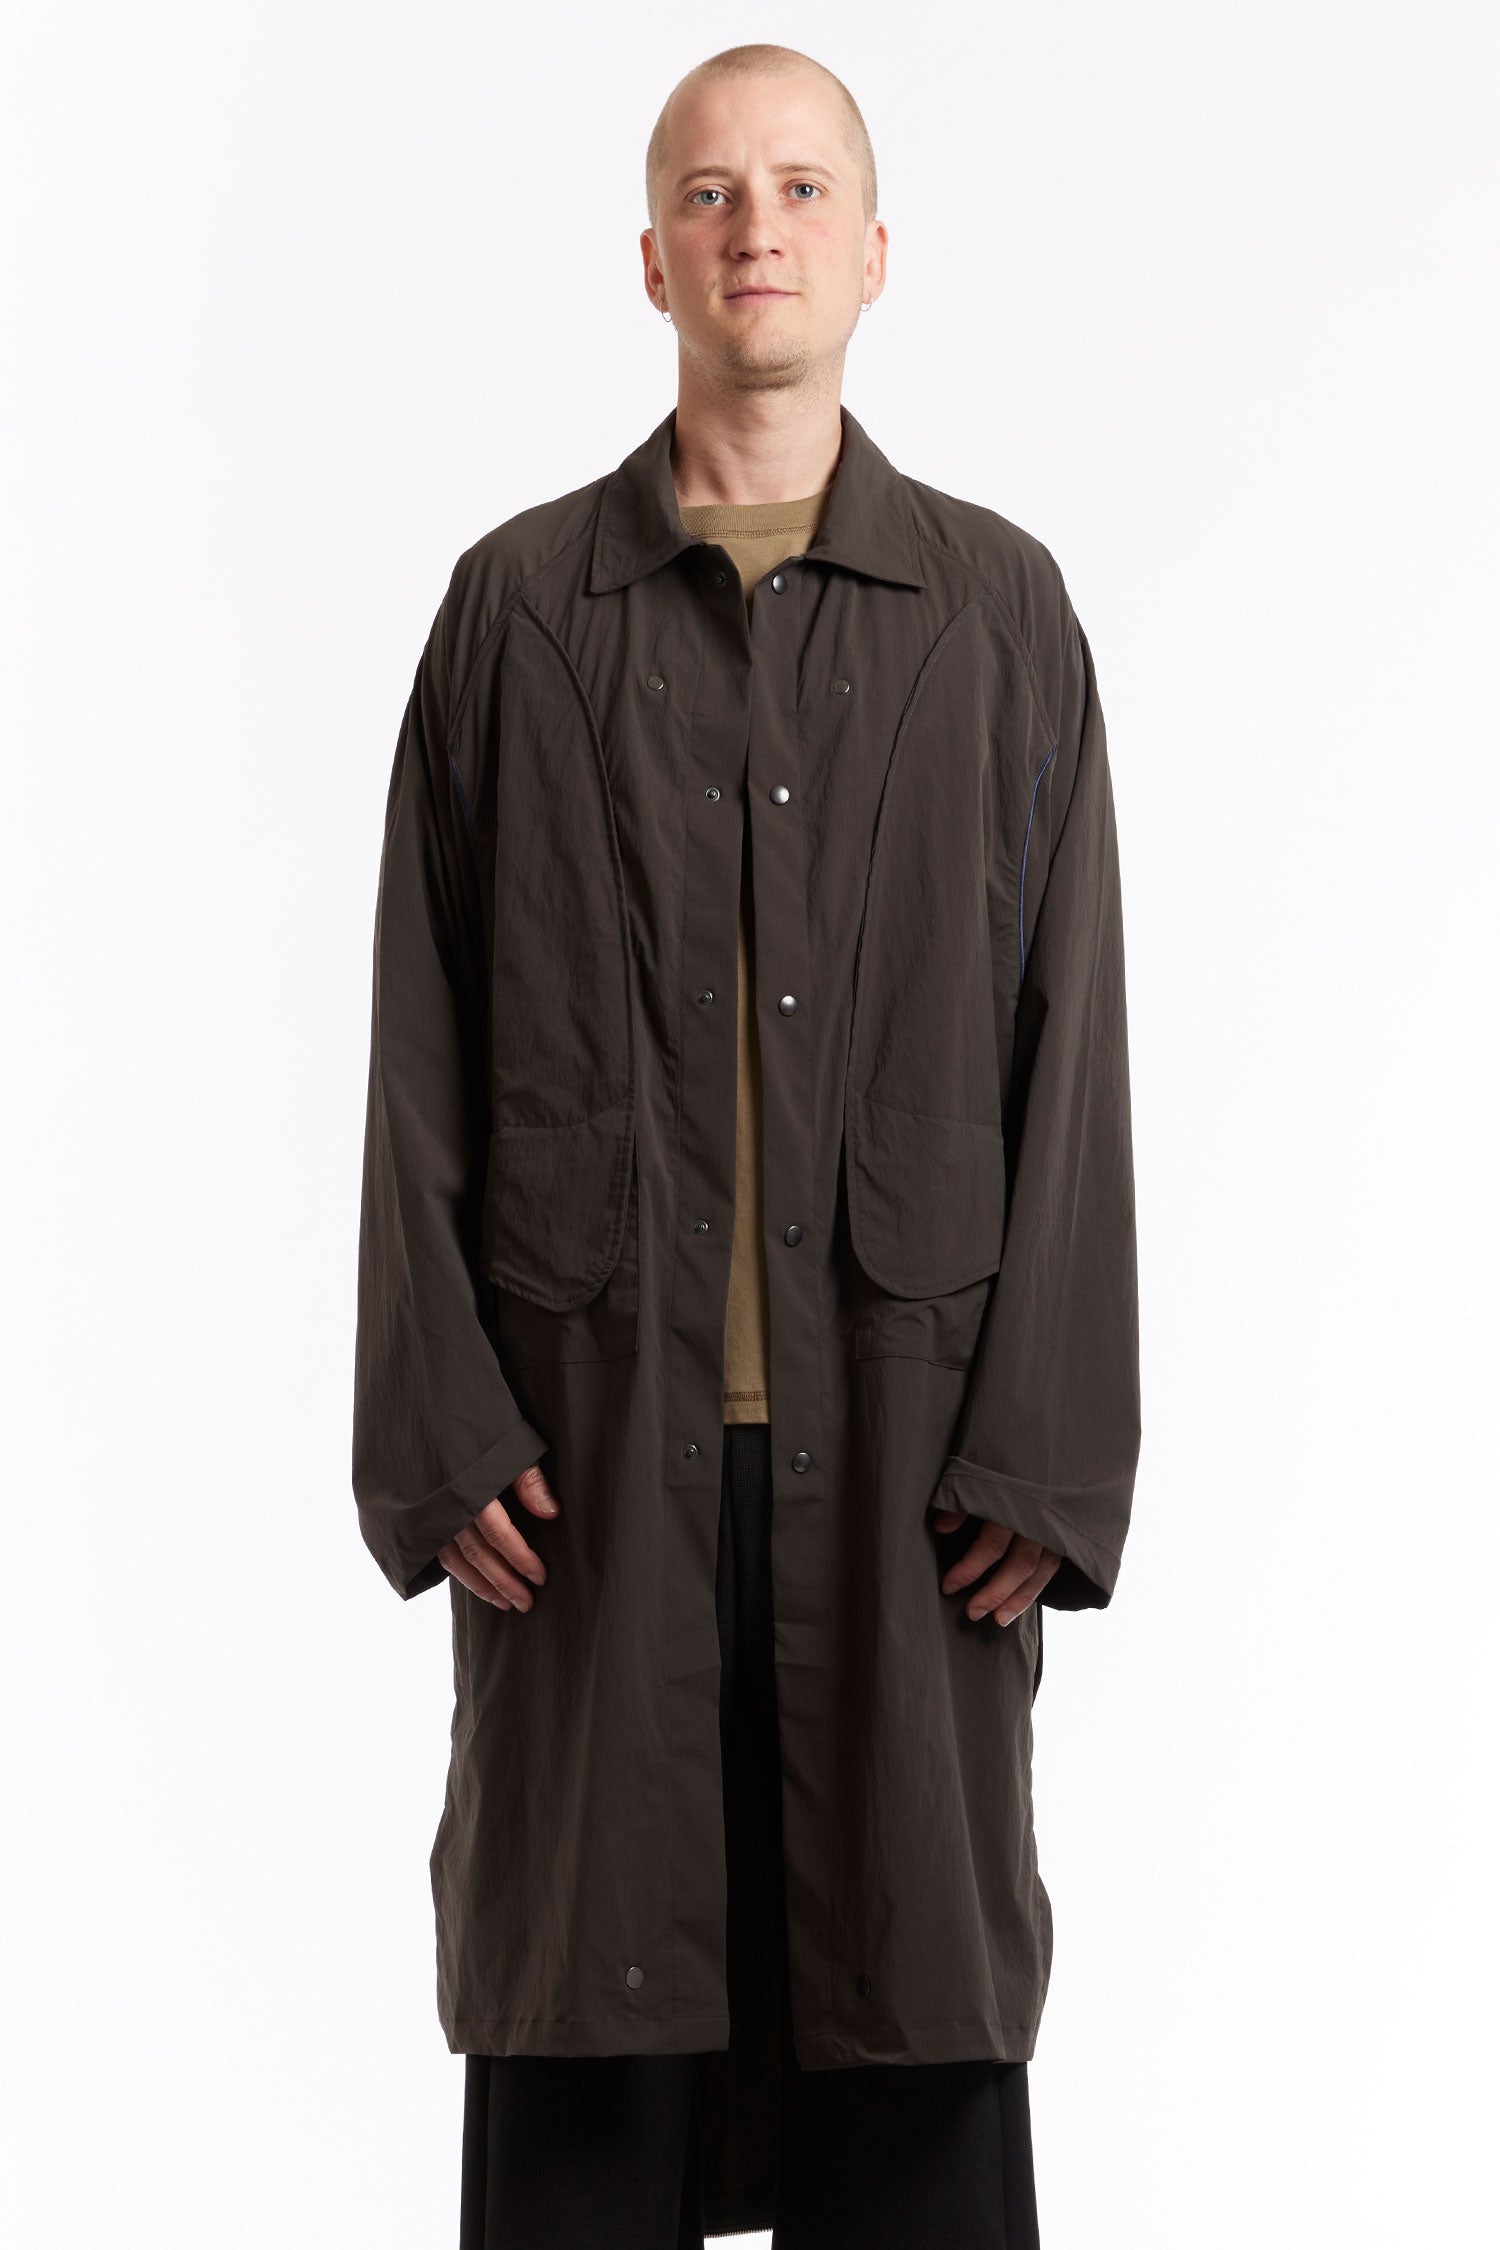 The AFFXWRKS - ADAPTIVE COAT  available online with global shipping, and in PAM Stores Melbourne and Sydney.